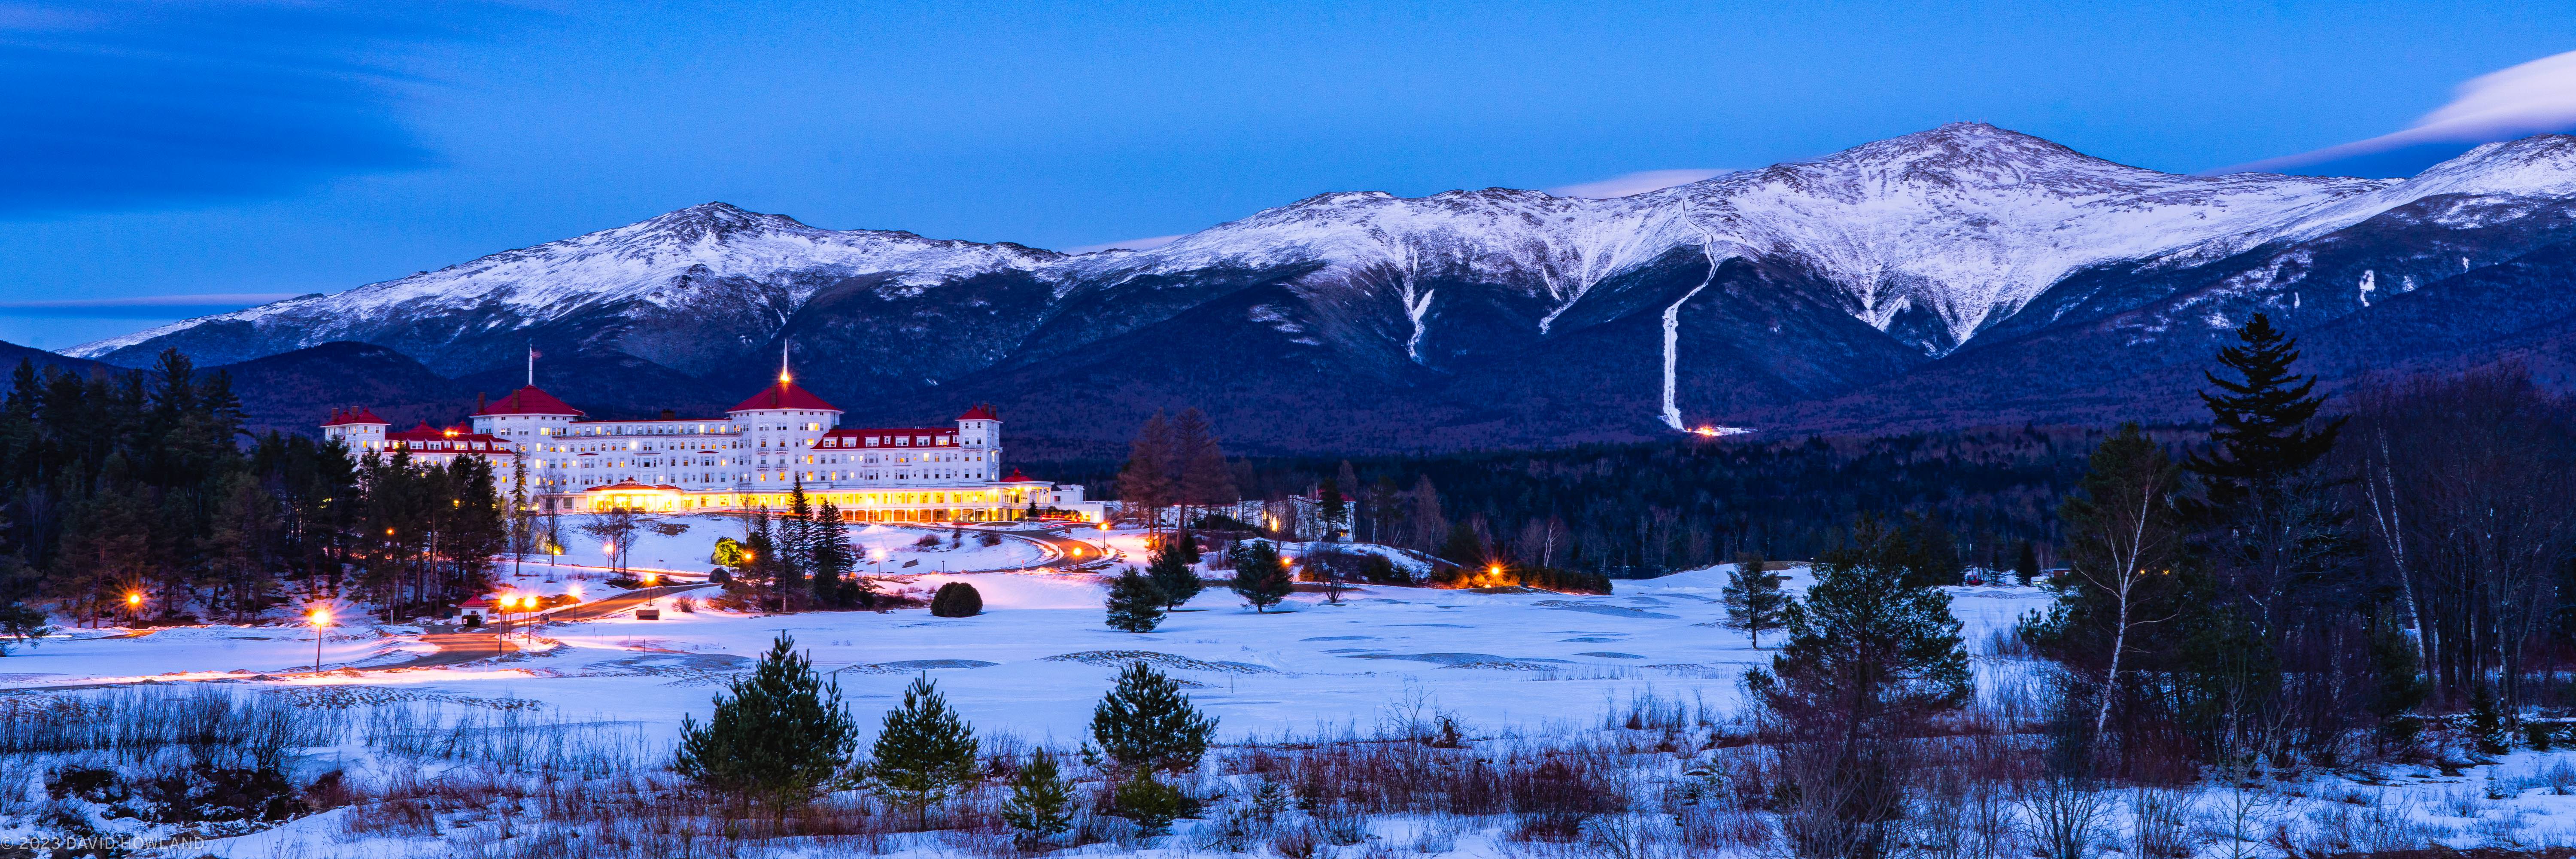 A panorama photo of the glowing orange lights of the Mount Washington Hotel building in front of the snow covered Presidential mountain range in New Hampshire.